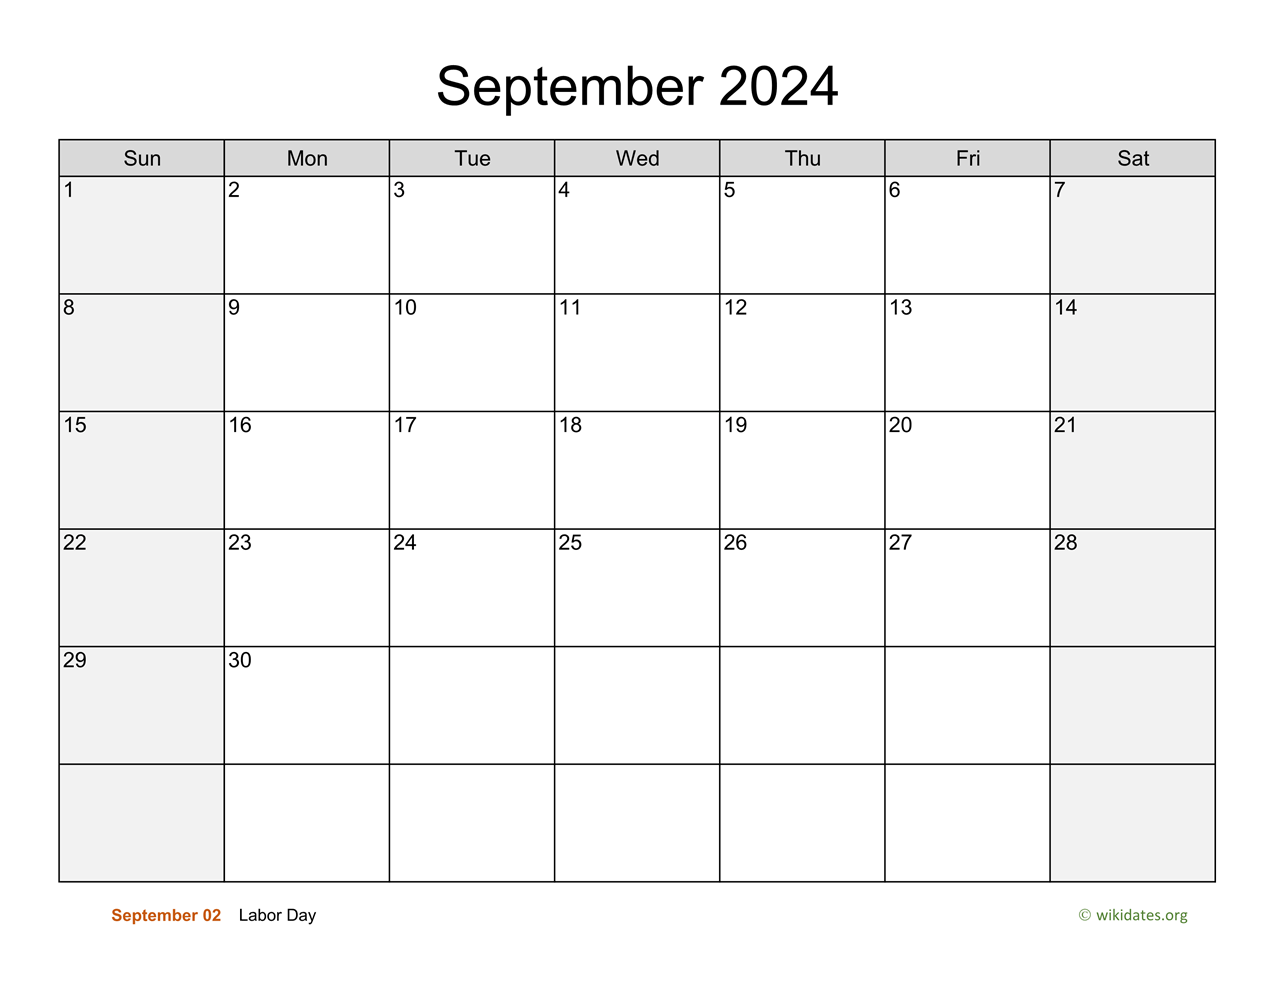 September 2024 Calendar with Weekend Shaded